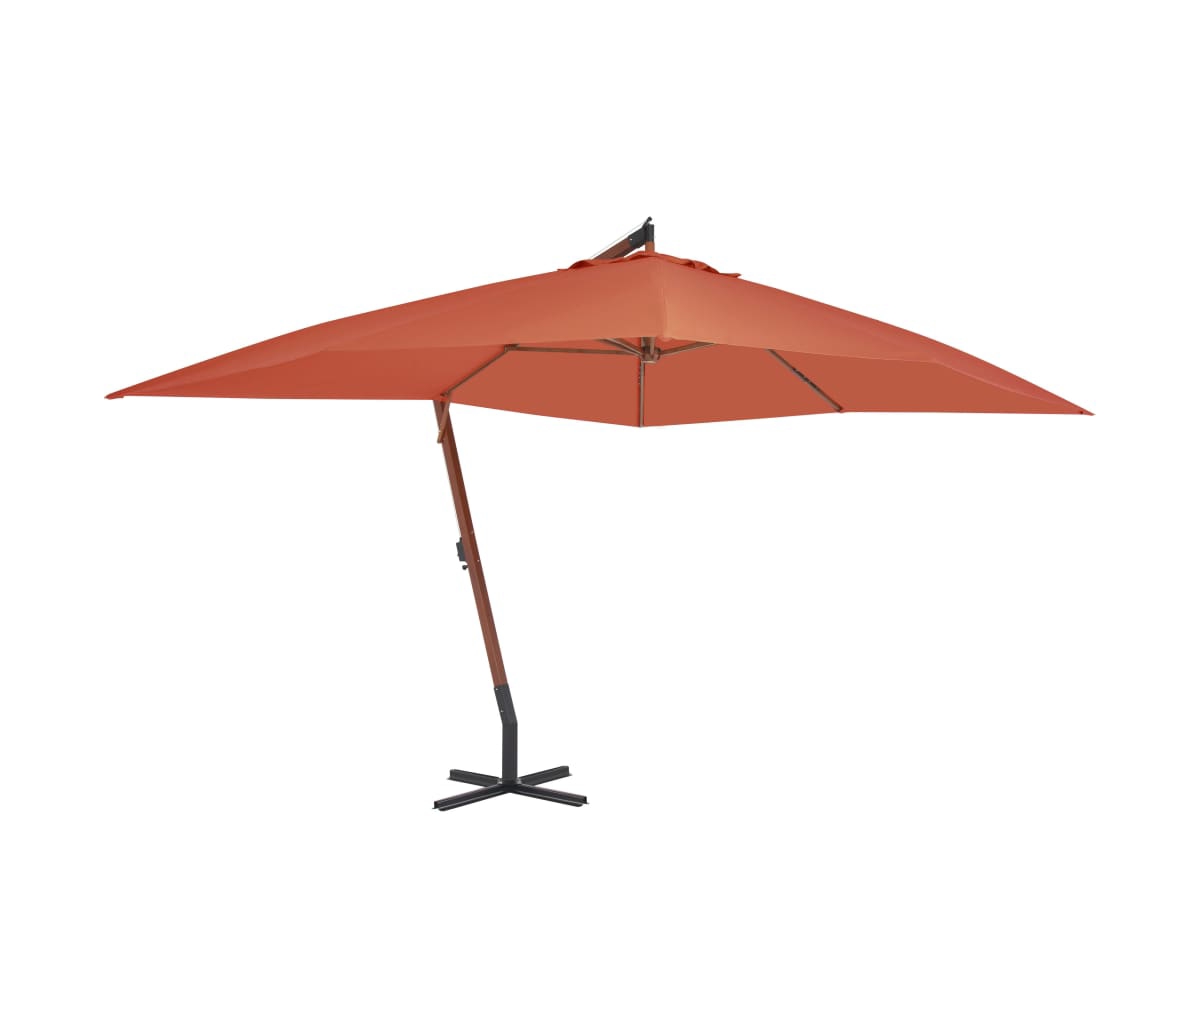 Cantilever Umbrella with Wooden Pole 157.5"x118.1" Terracotta - Red